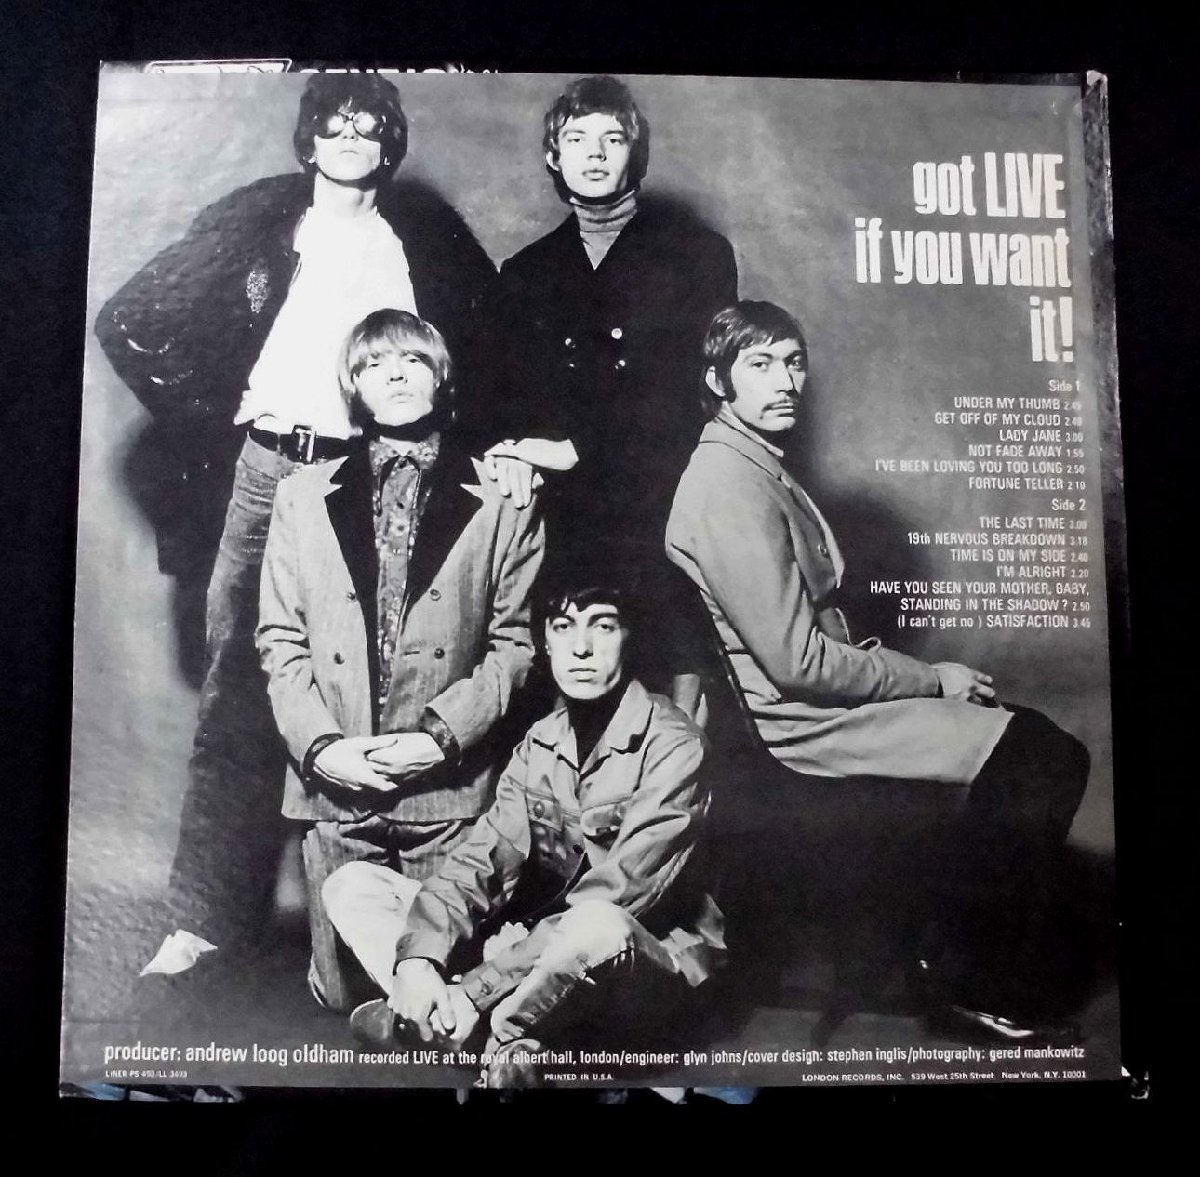 ●US-London RecordsオリジナルMono,EX:EX+Copy!! The Rolling Stones / Got Live If You Want It! - 1